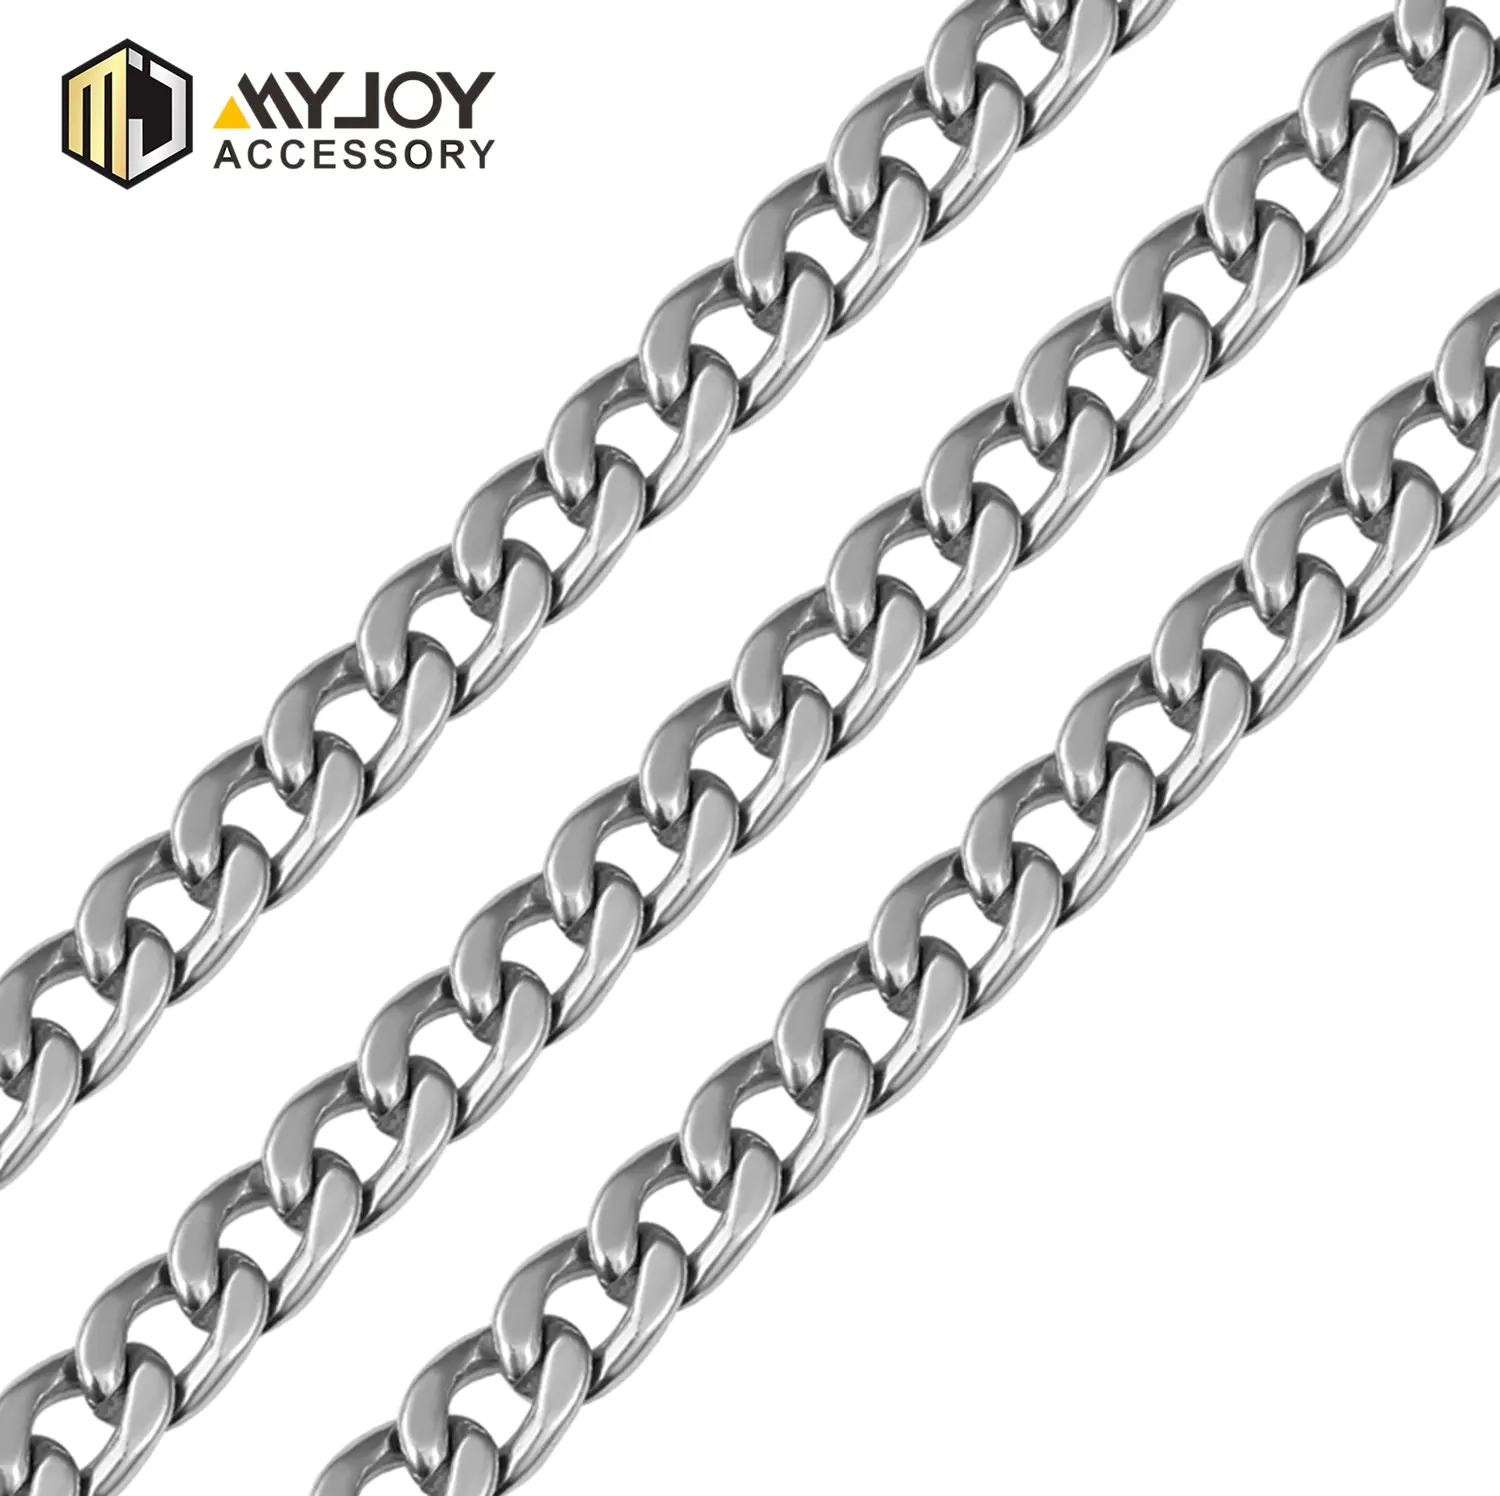 MYJOY 13mm1050mm strap chain company for purses